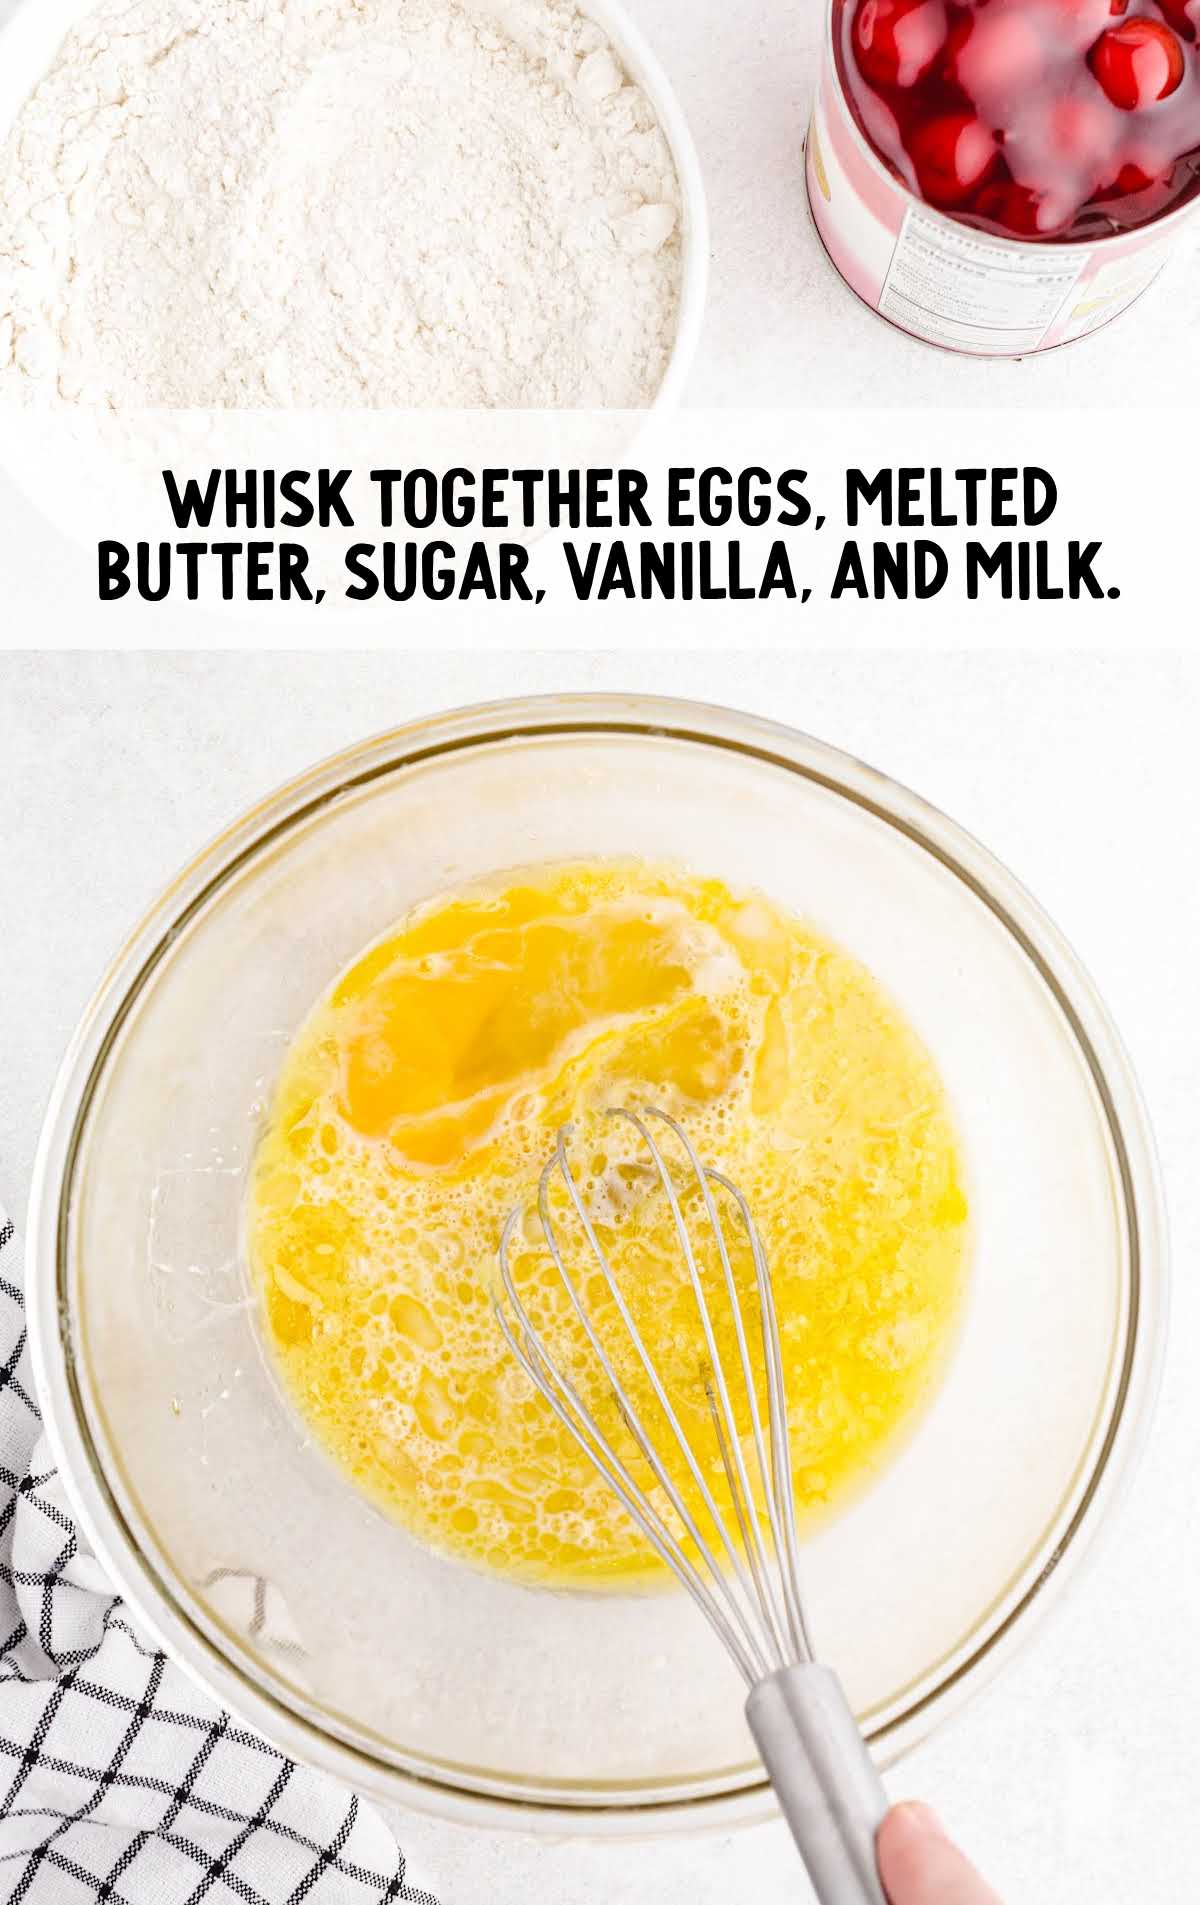 eggs, butter, sugar, vanilla extract, and milk whisked into a bowl